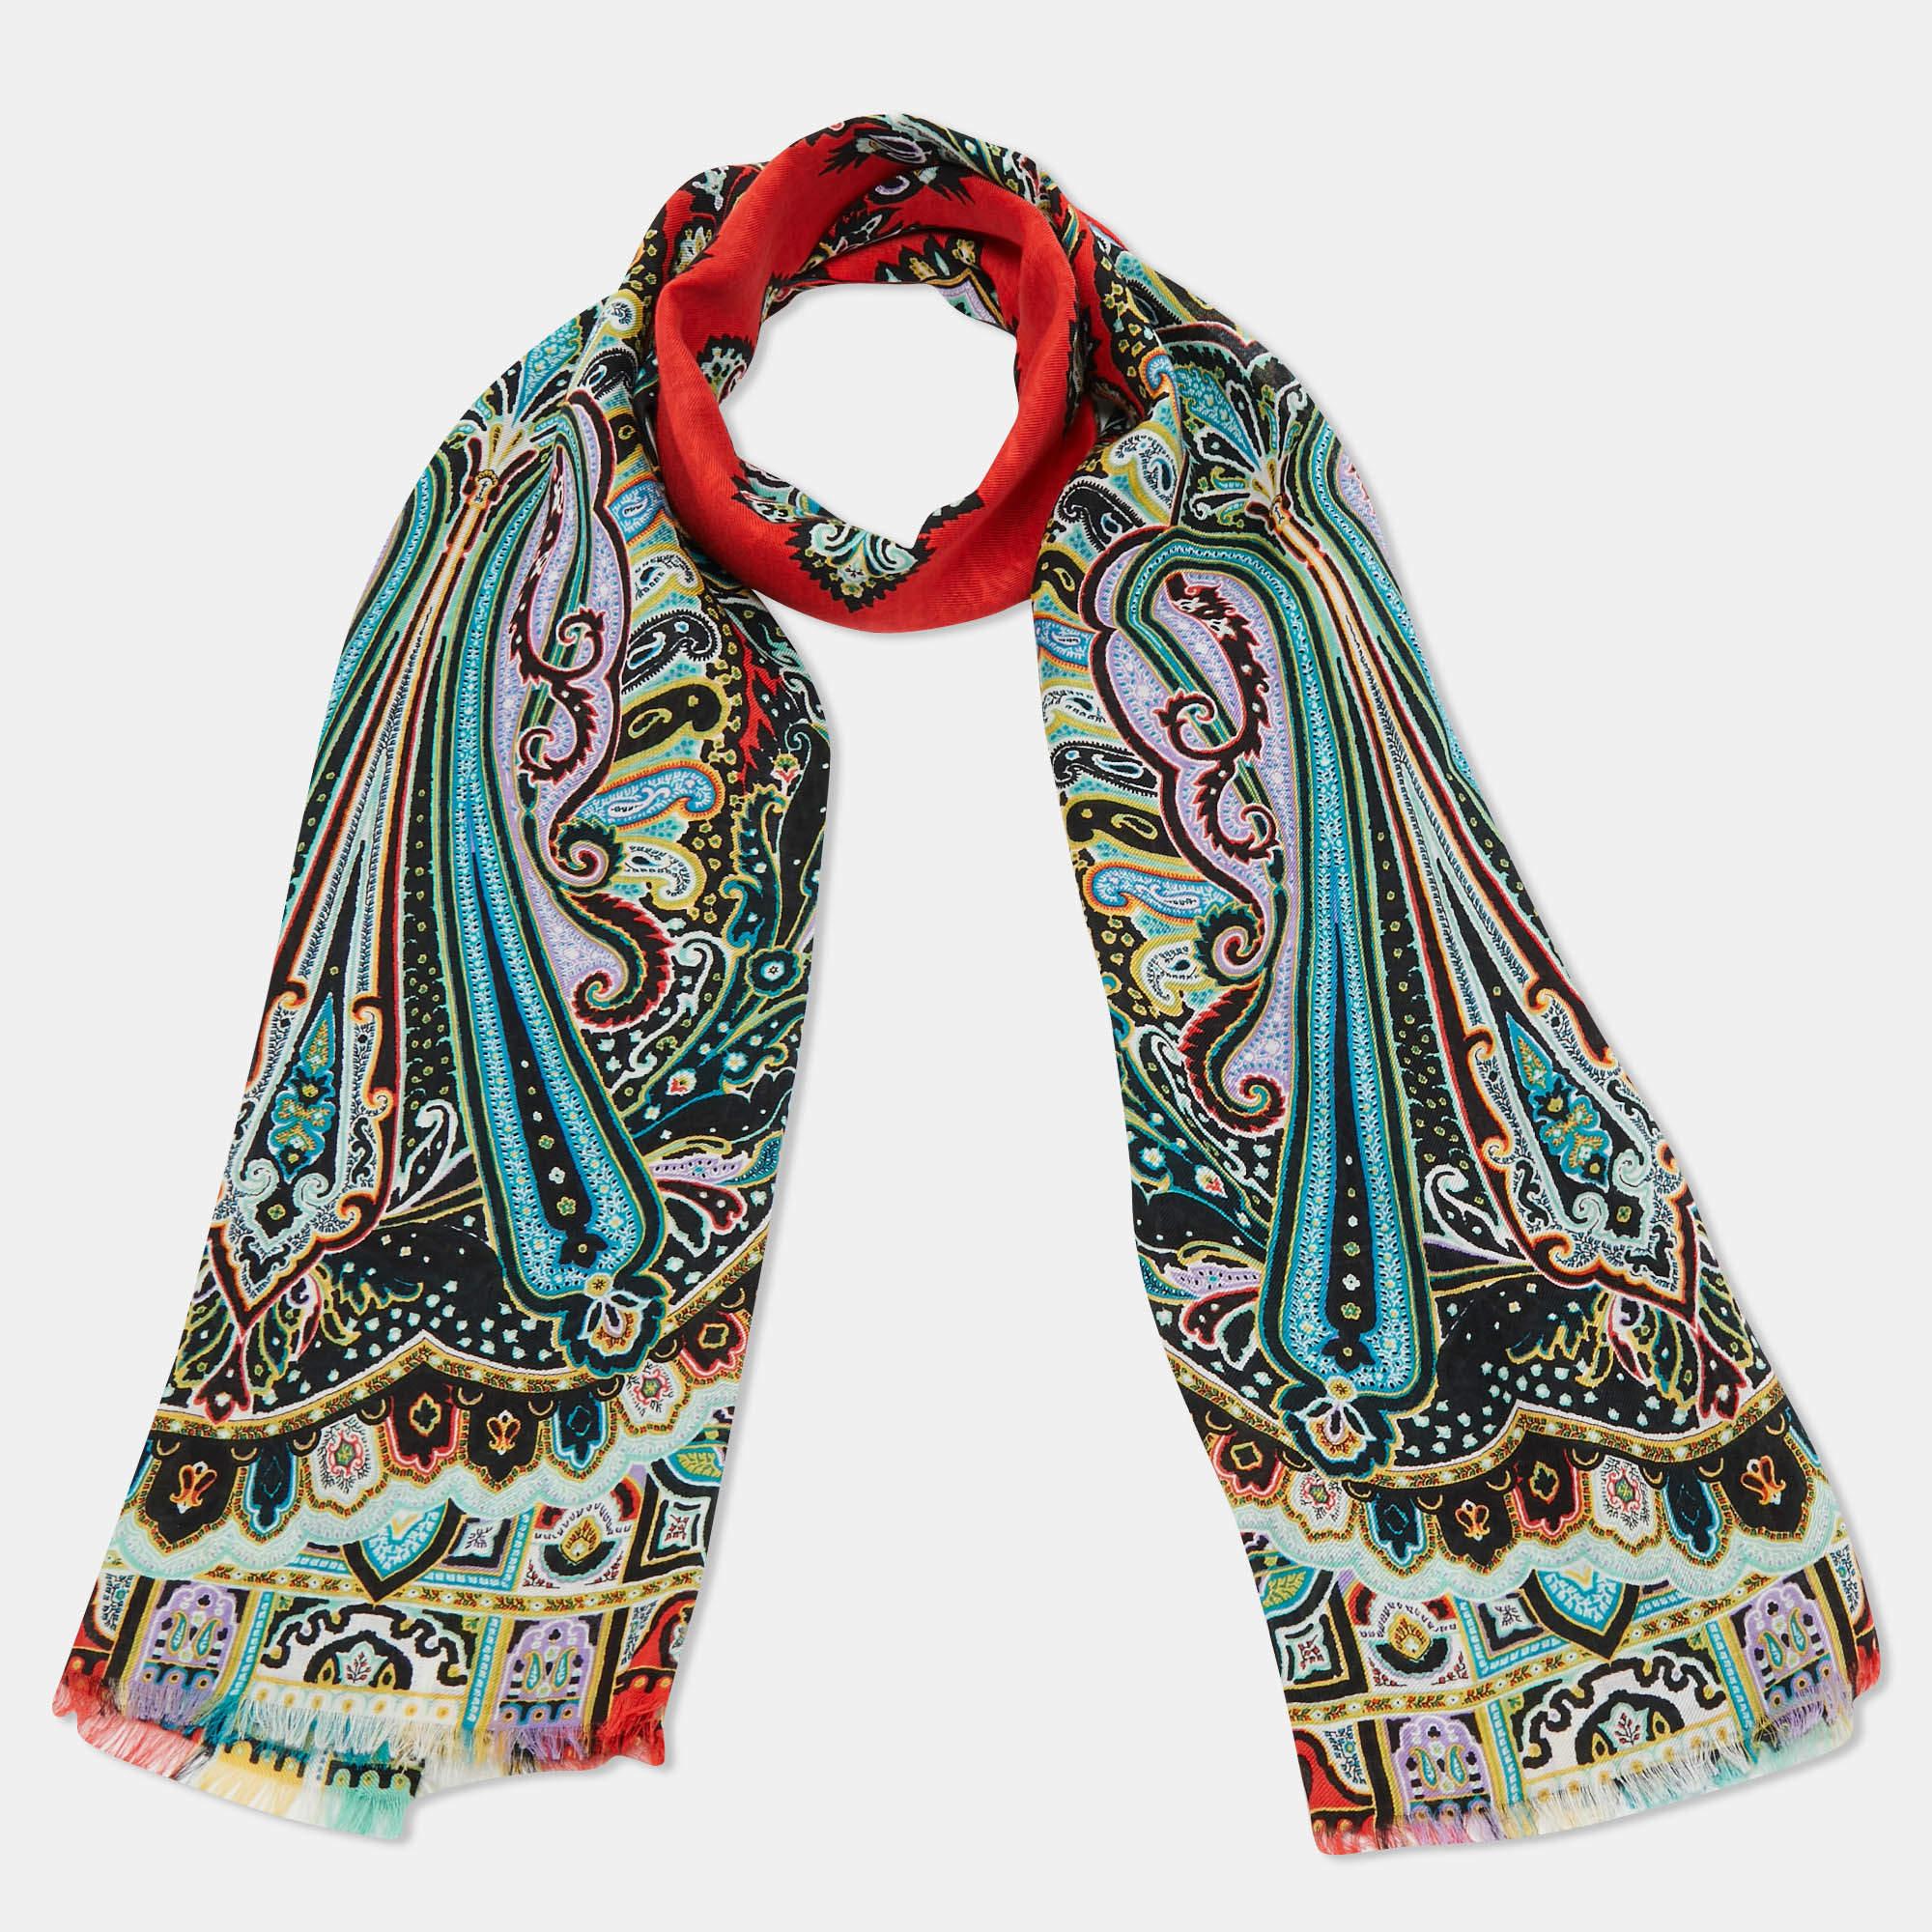 Style this Etro stole gently around your neck for a luxe finish. It is made of a cashmere blend and covered in signature paisley prints.

Includes: Price Tag